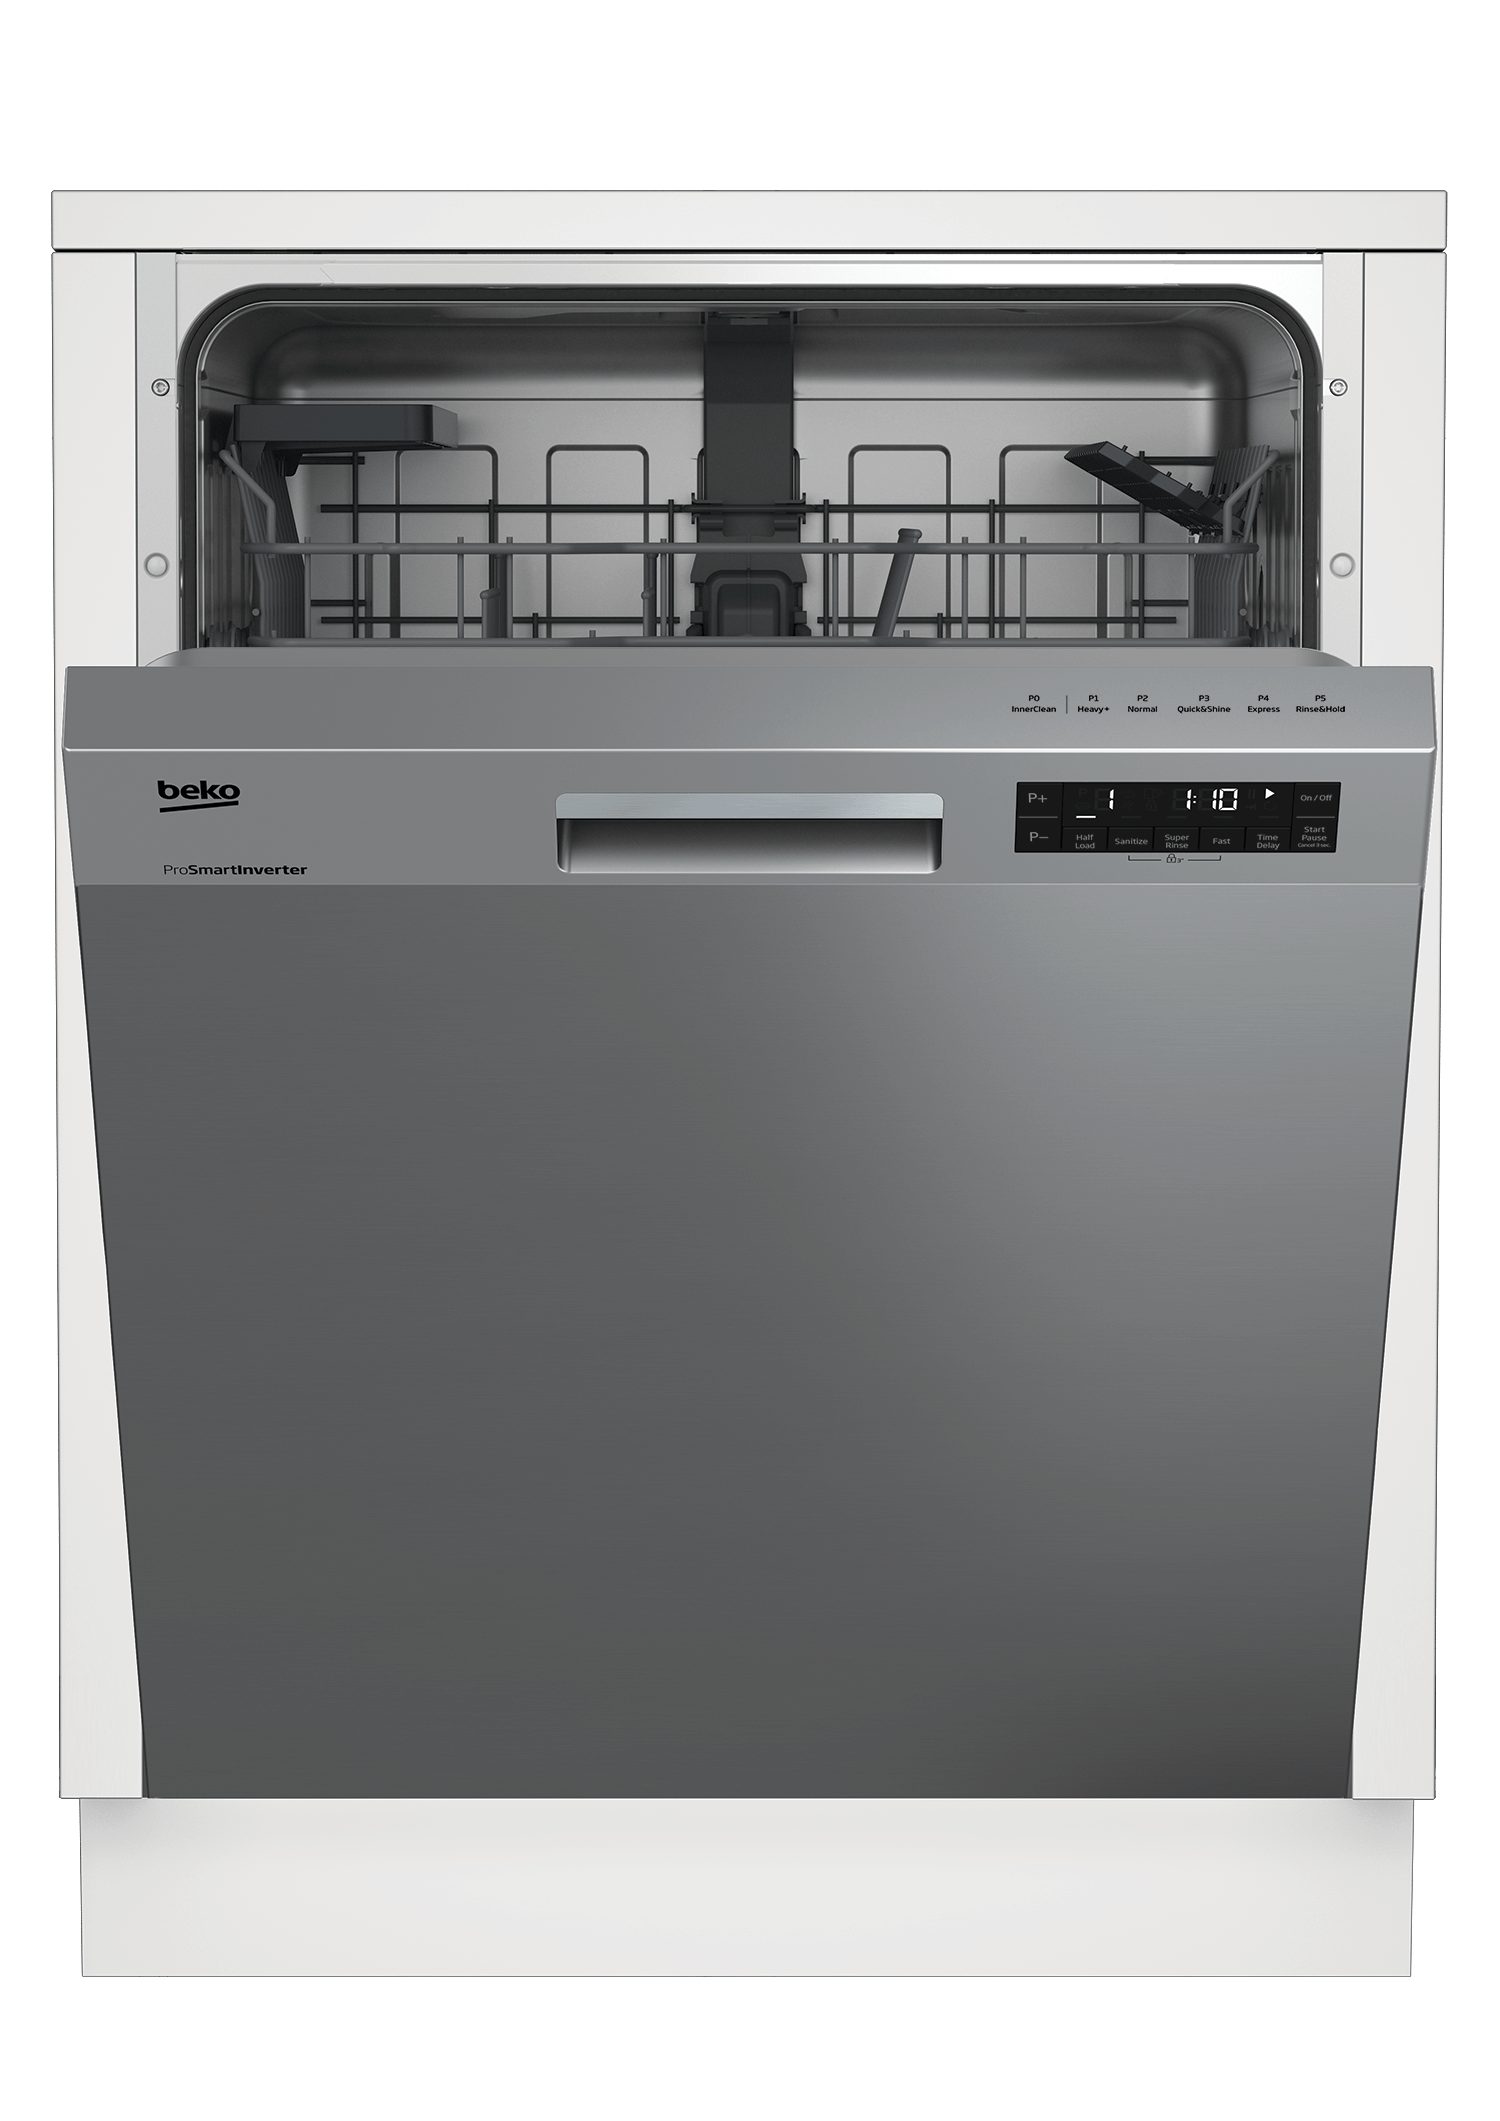 Beko Tall Tub Stainless Steel Dishwasher, 14 place settings, 48 dBa, Front Control